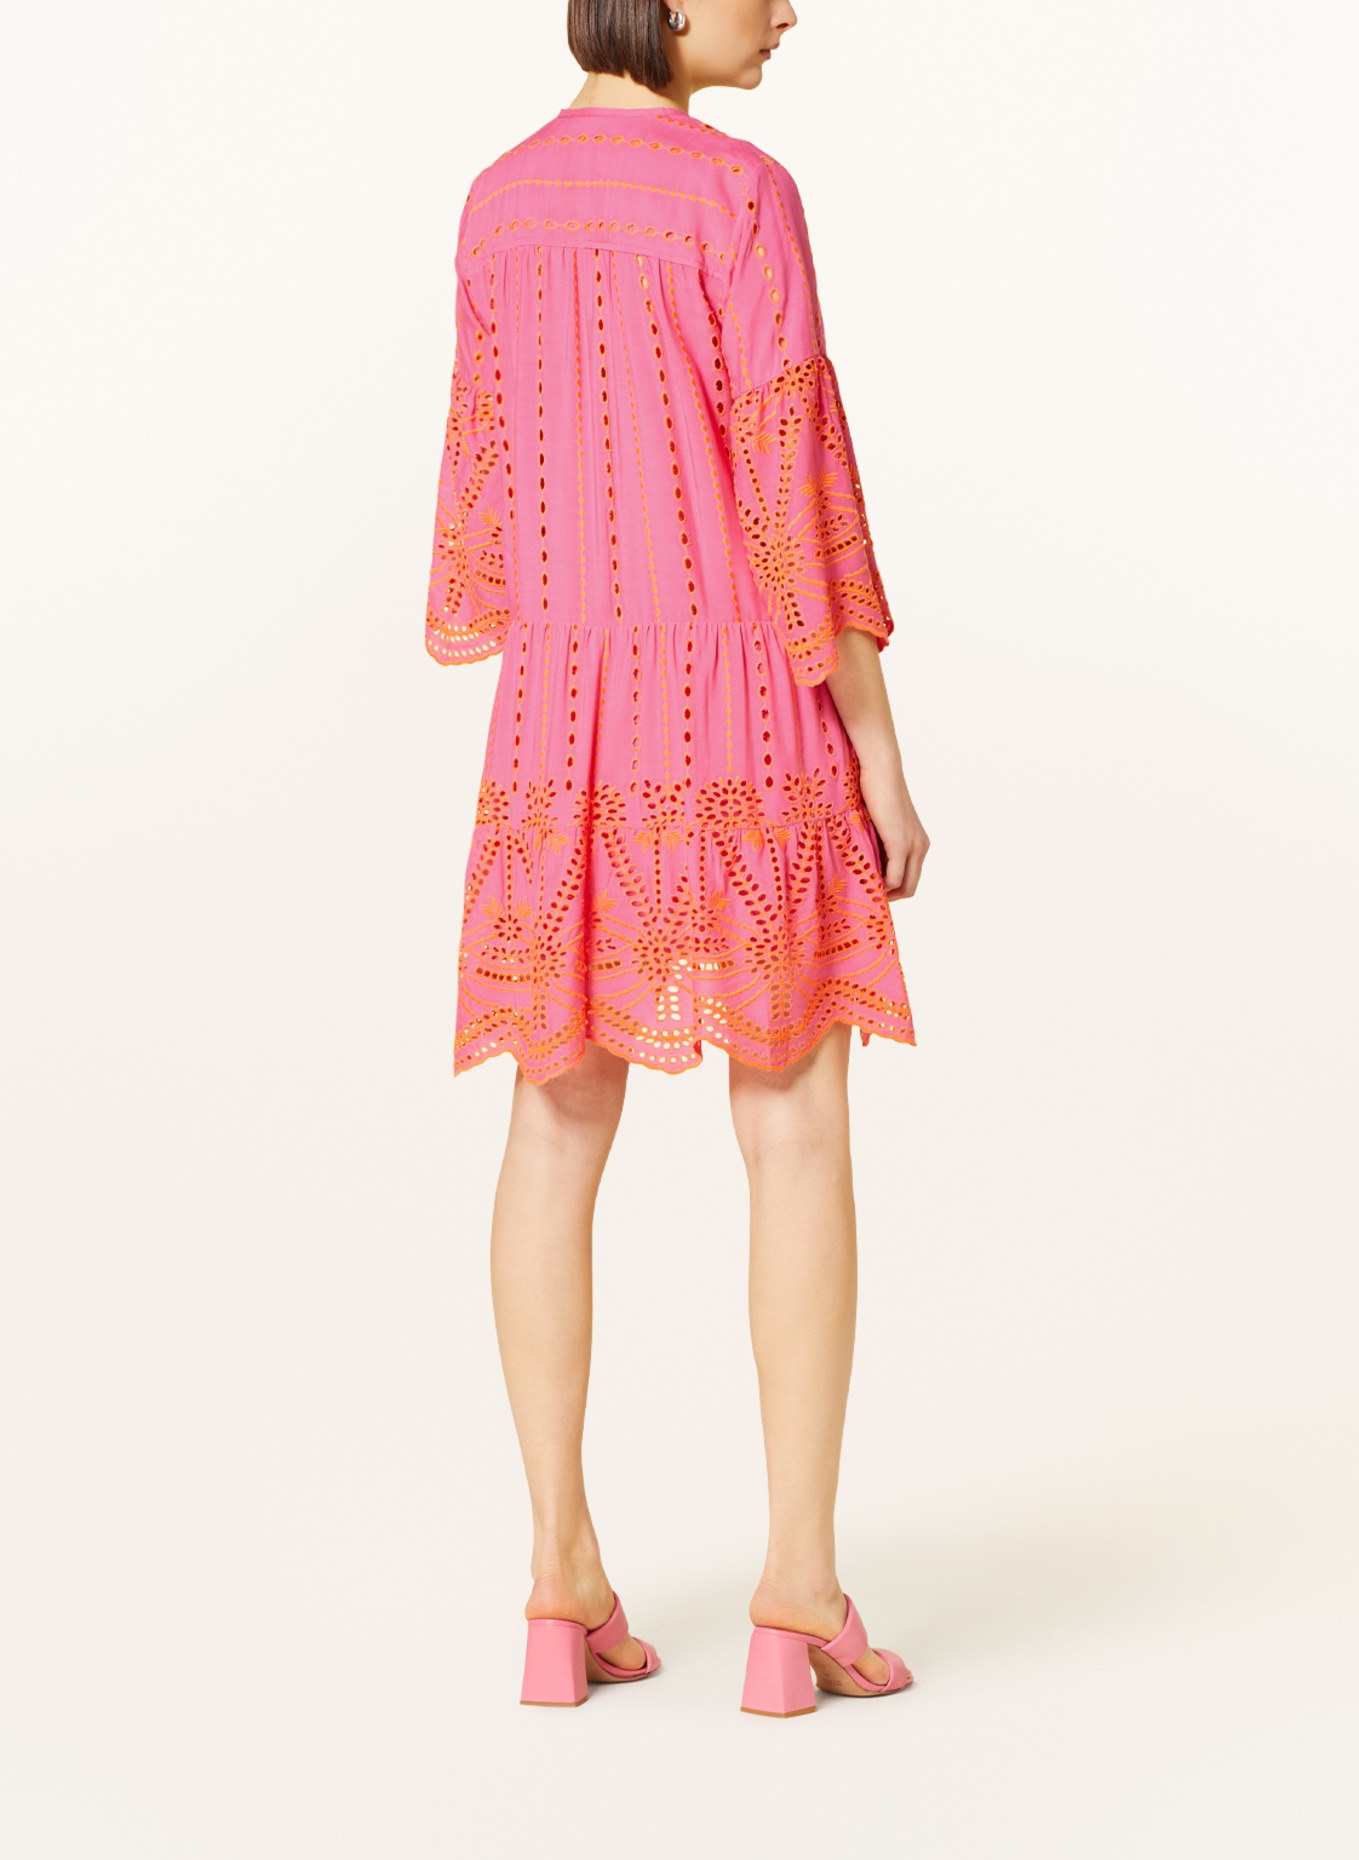 VALÉRIE KHALFON Dress RIVA with 3/4 sleeves and broderie anglaise, Color: PINK/ DARK YELLOW (Image 3)